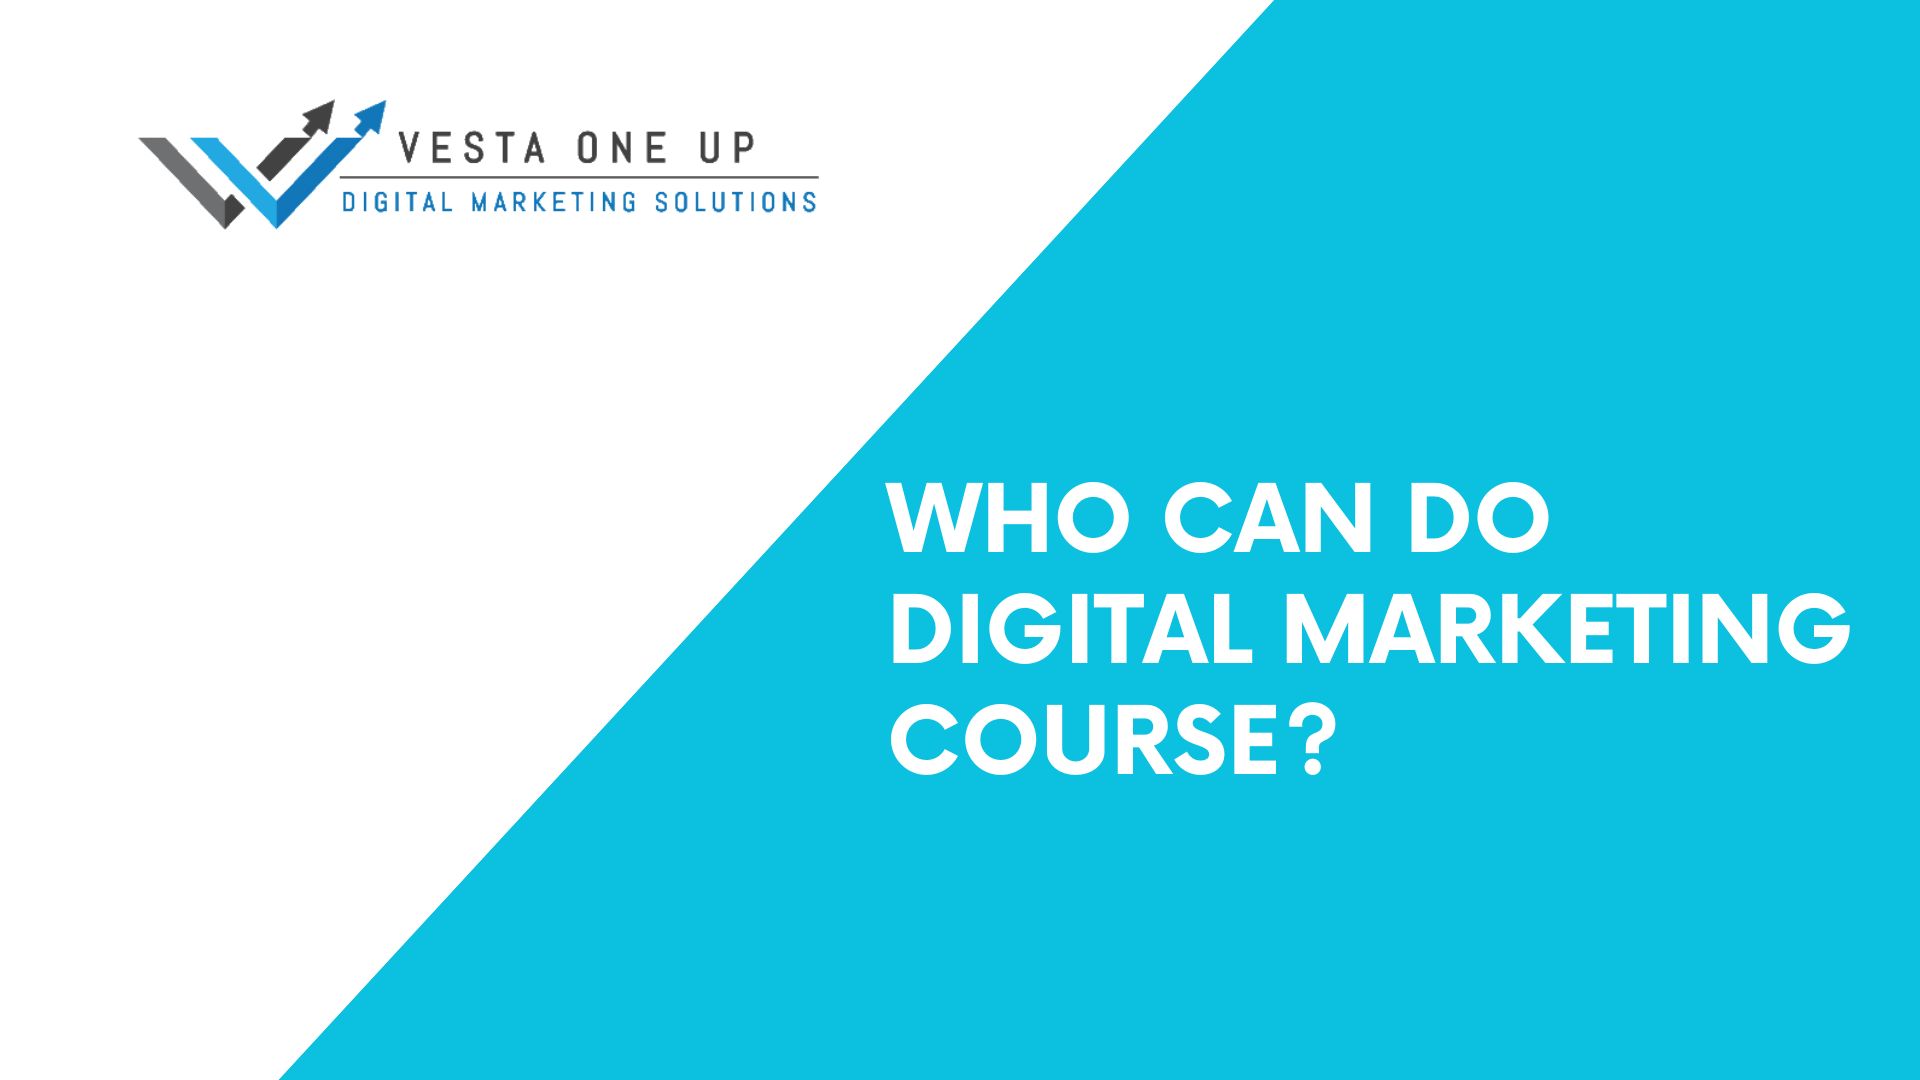 Who can do digital marketing course?